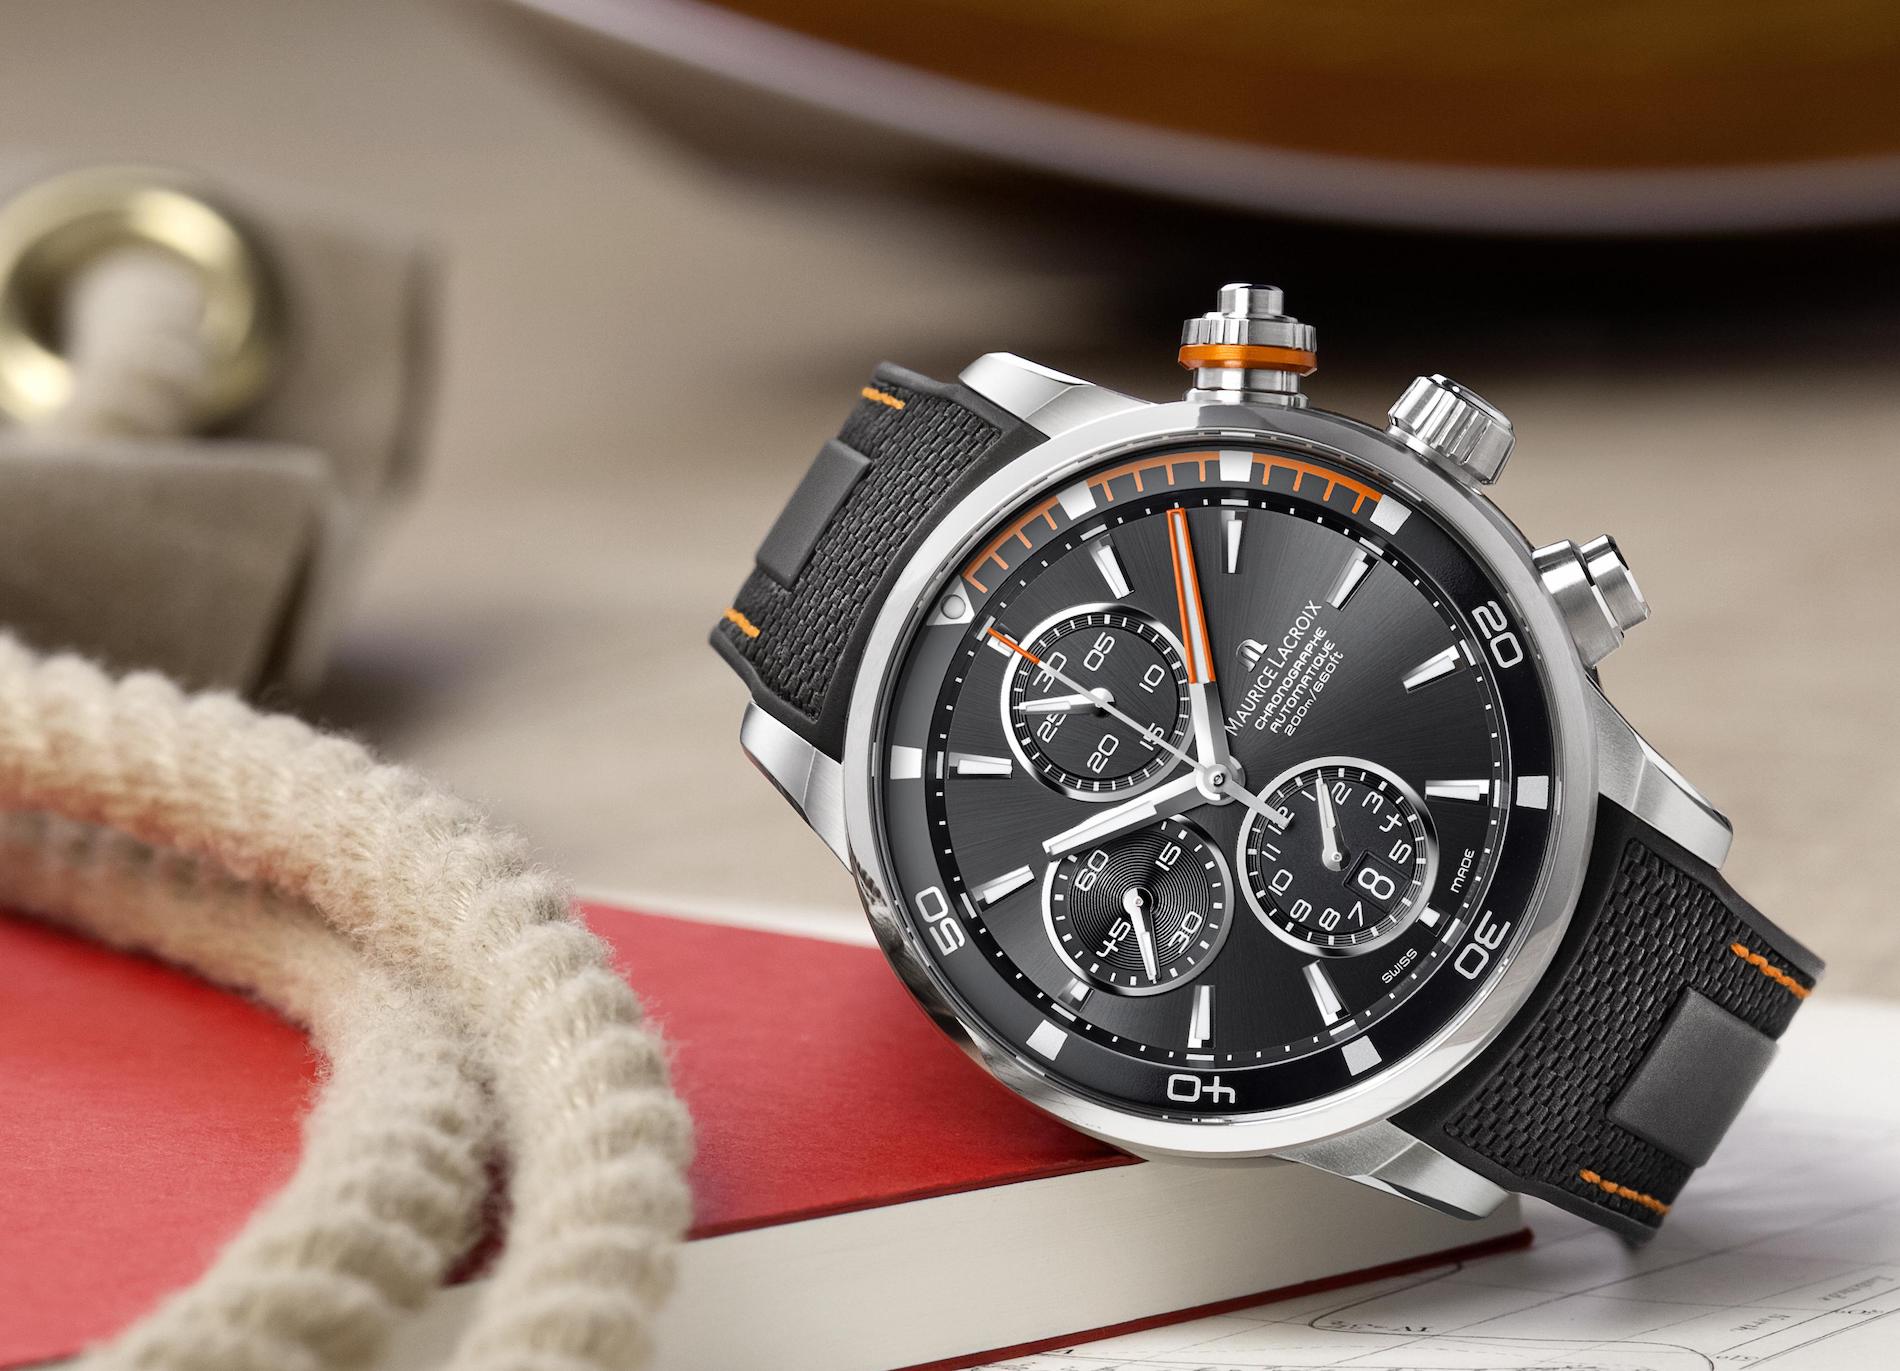 Maurice Lacroix Pontos S Watches 70% Off Black Friday Sale